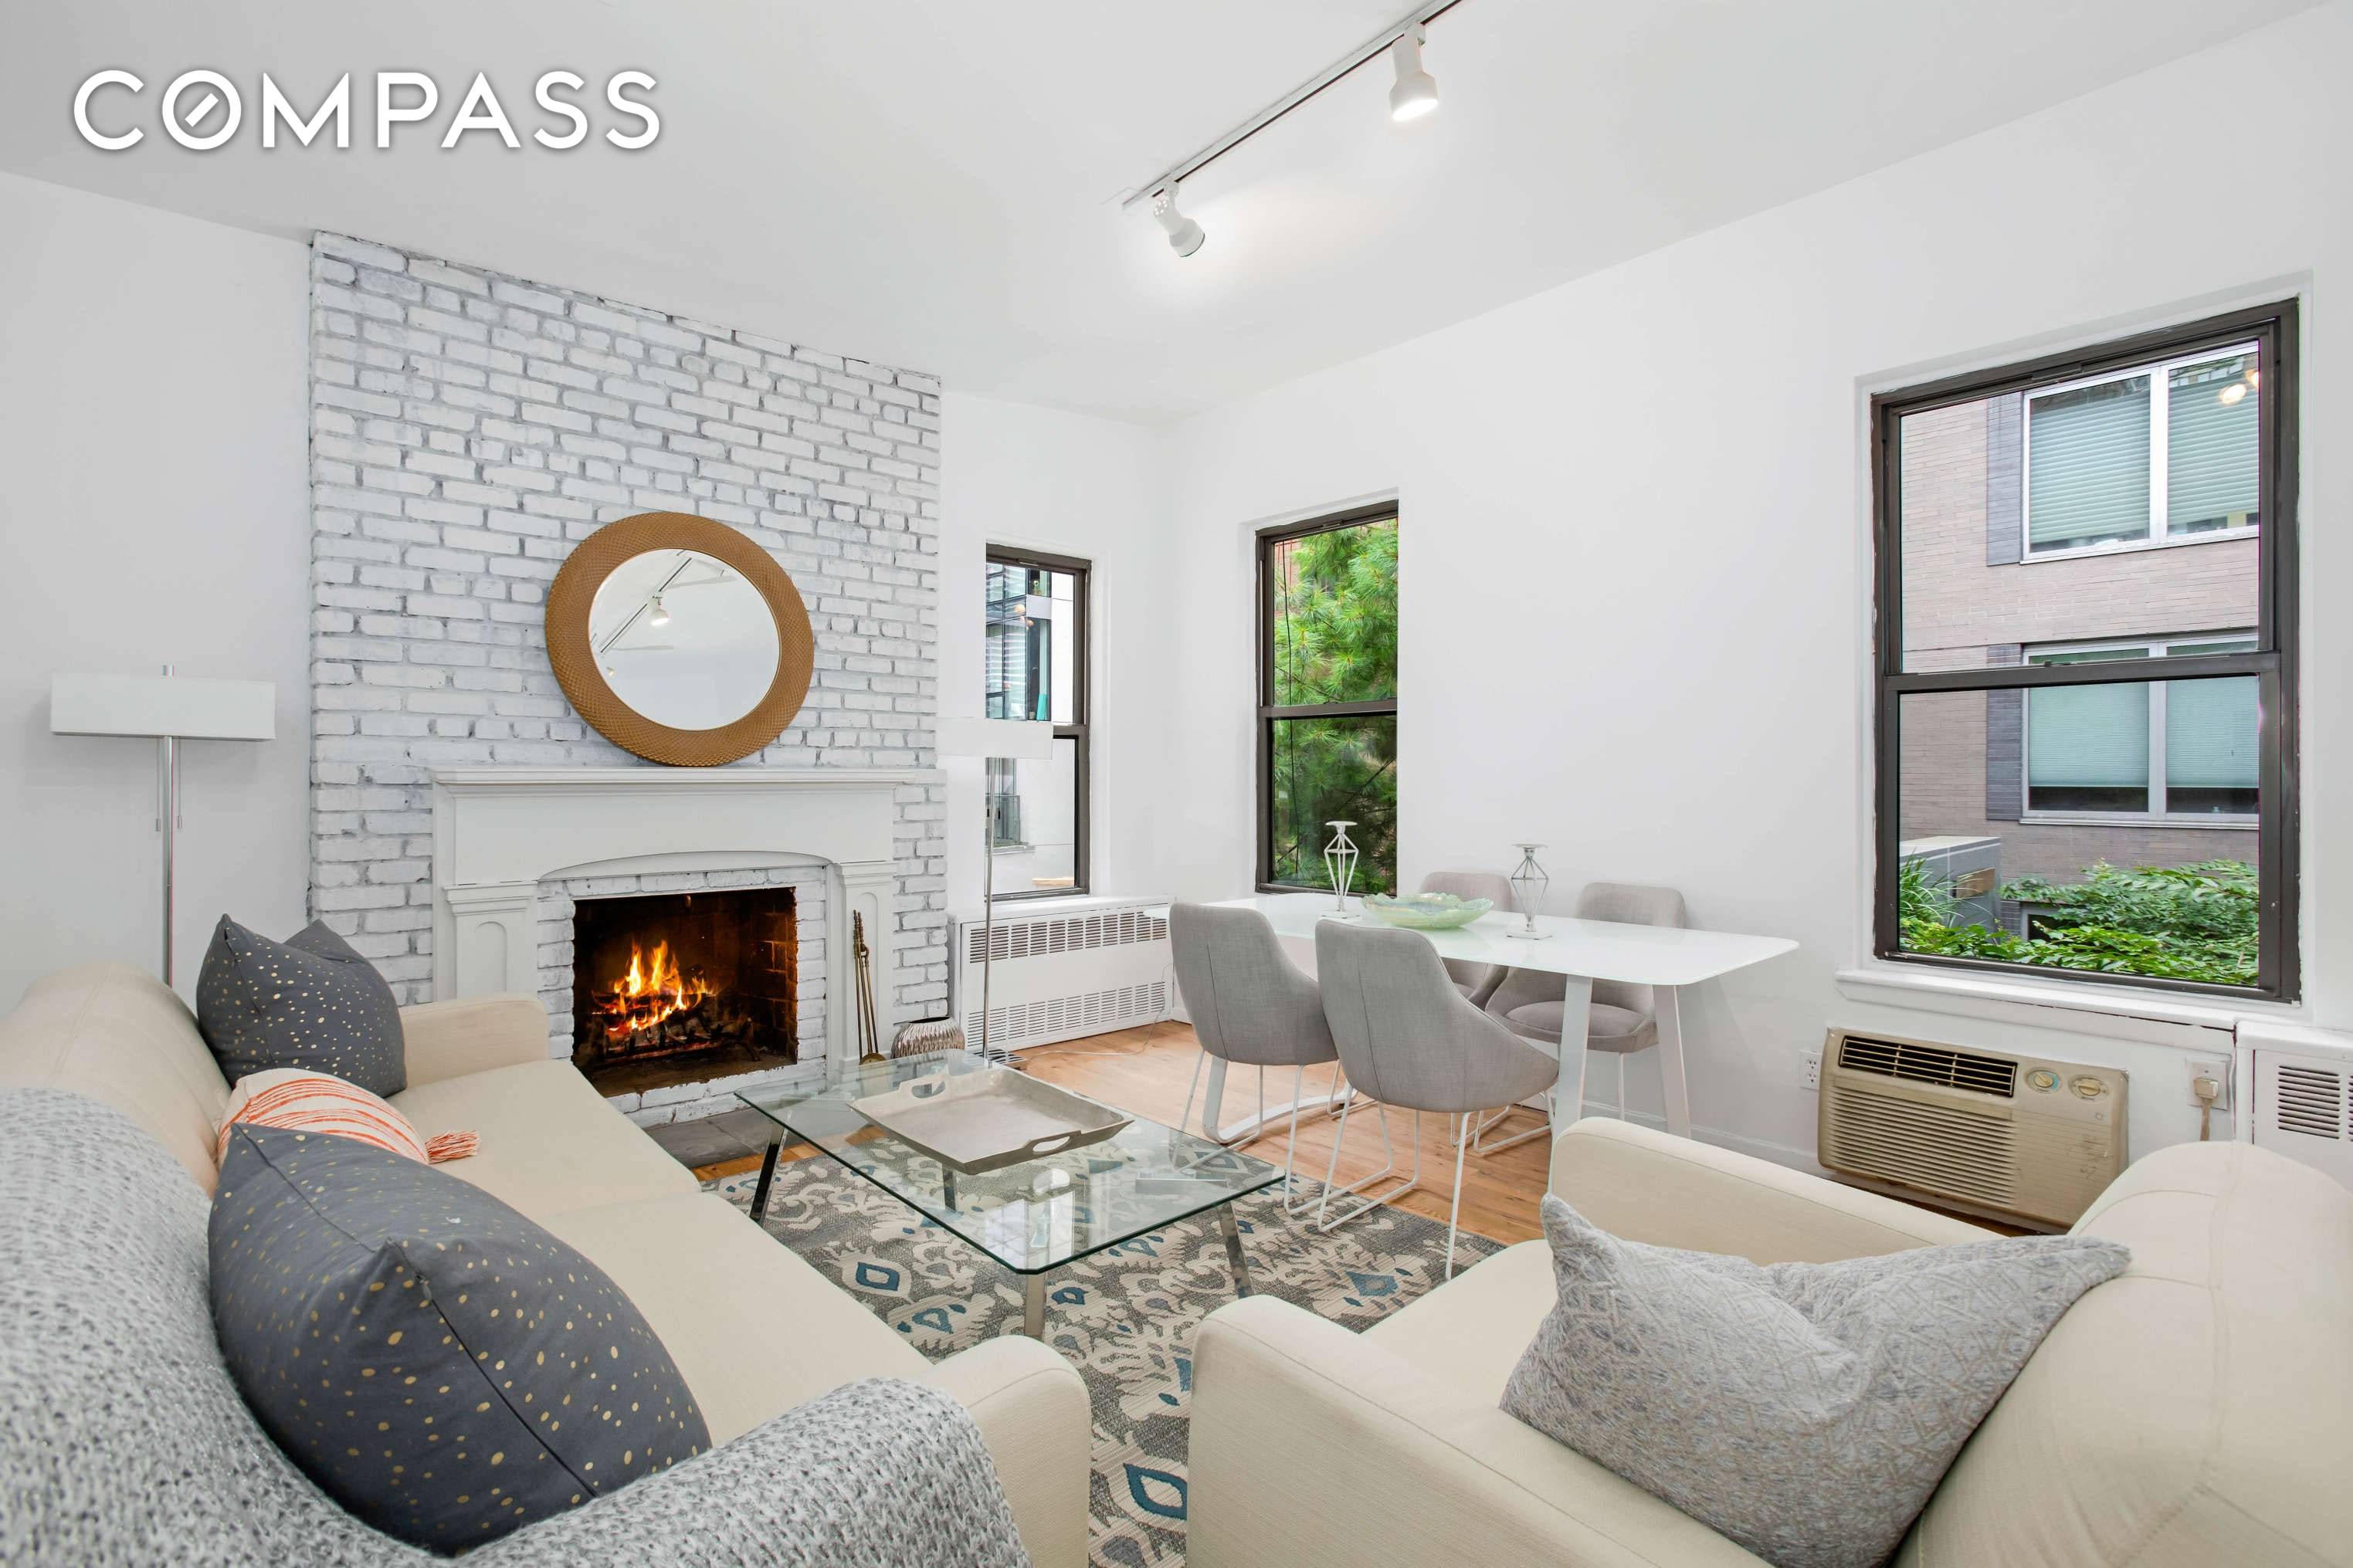 Just two flights up and enjoy incredible comfort and ease in this two bedroom, one bathroom home in a boutique Murray Hill cooperative.